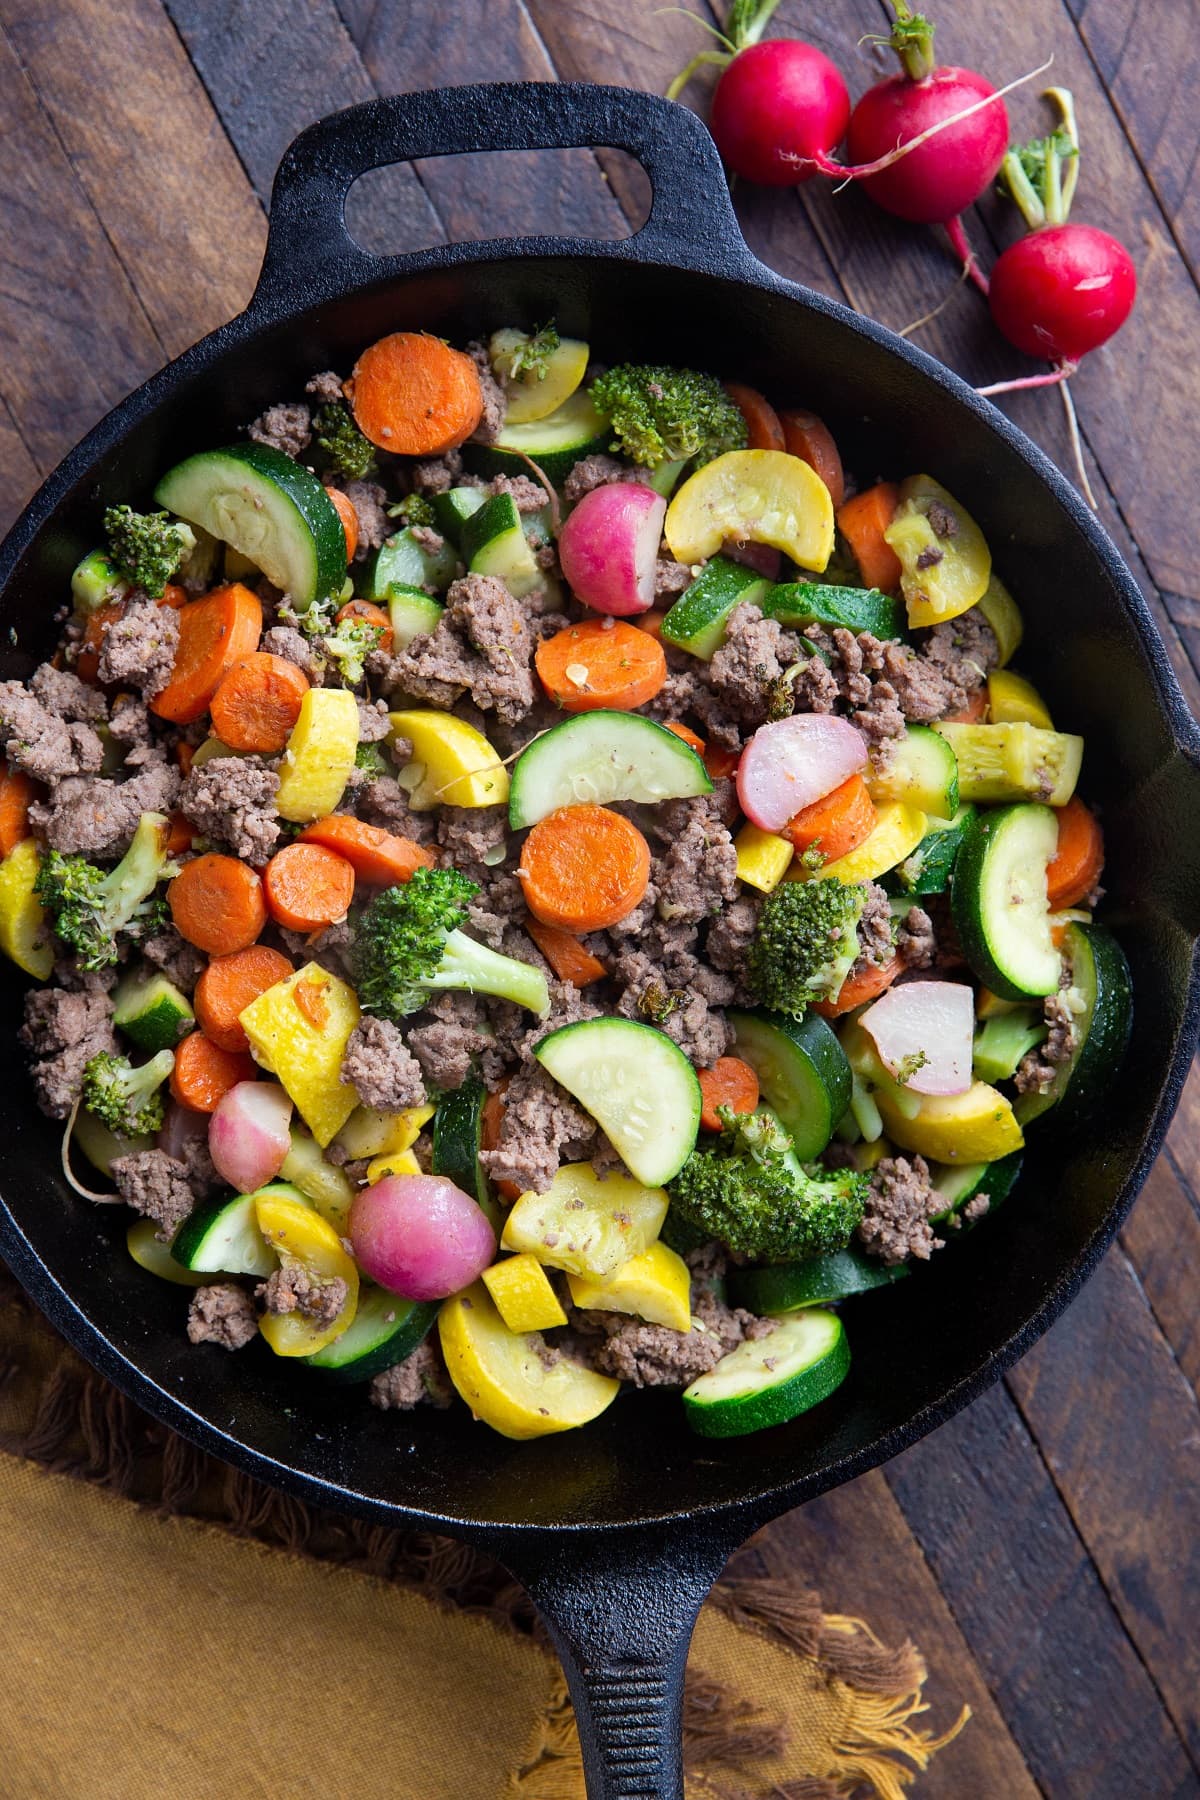 https://www.theroastedroot.net/wp-content/uploads/2018/08/vegetable-and-ground-beef-skillet-7.jpg